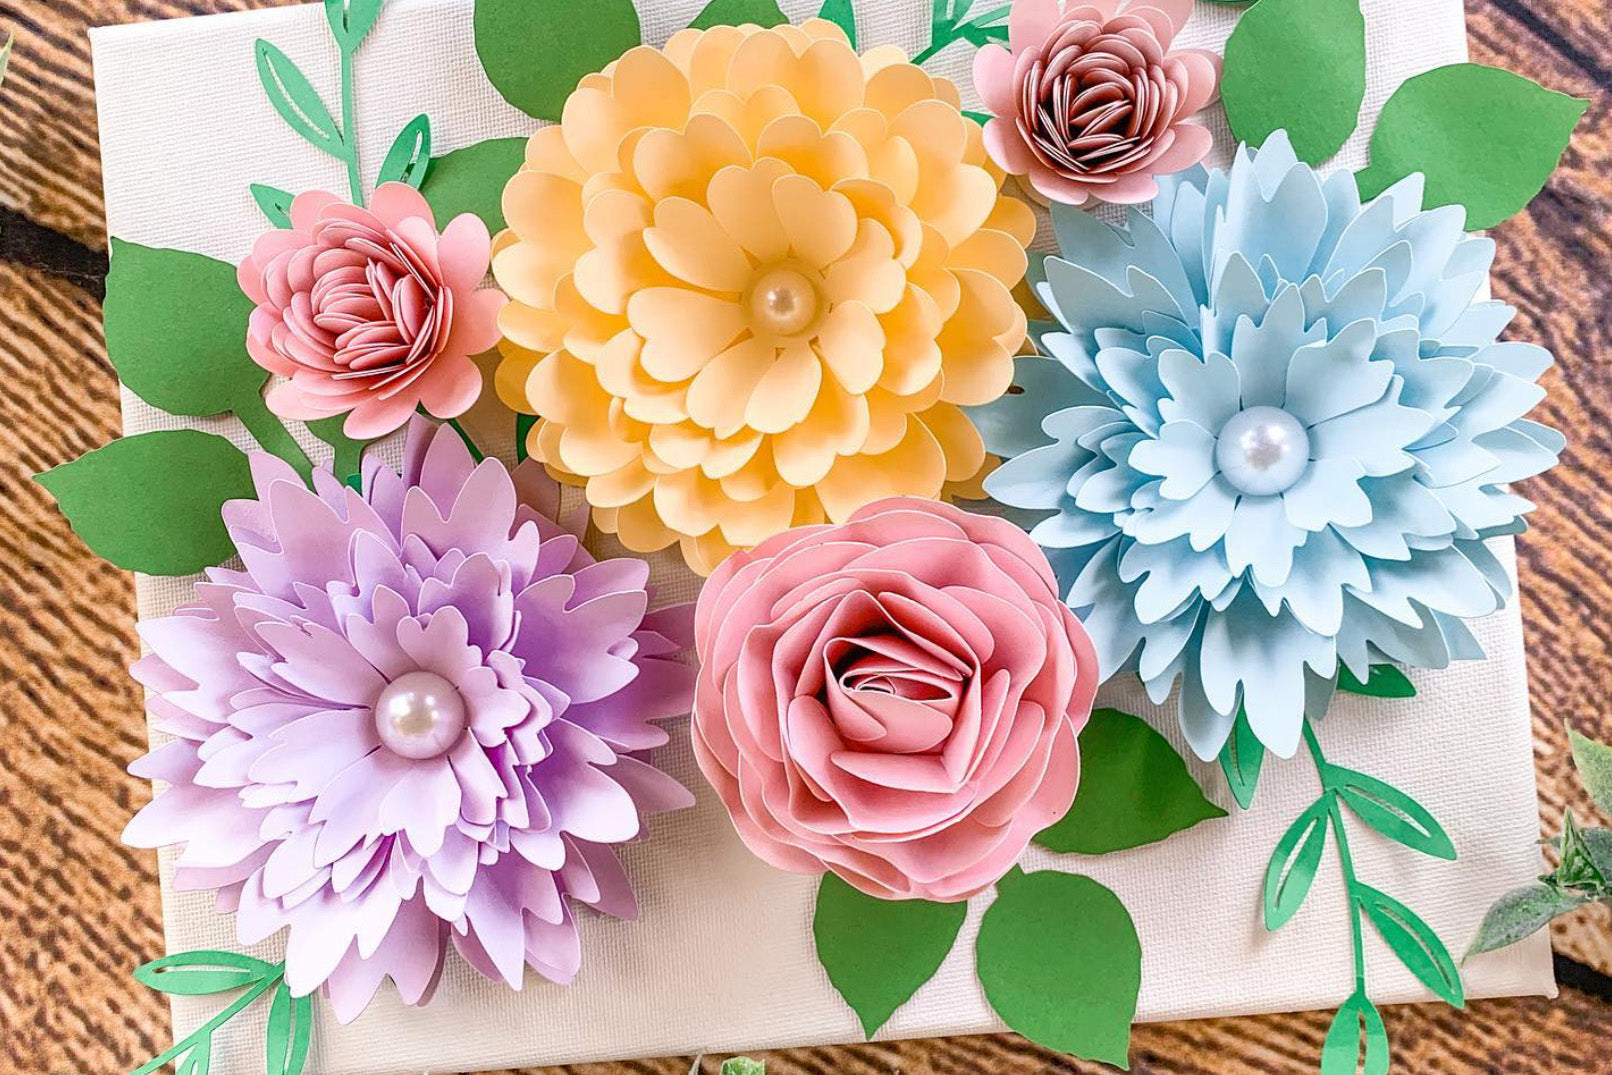 How to make paper flower bouquet step by step tutorial - miss mv